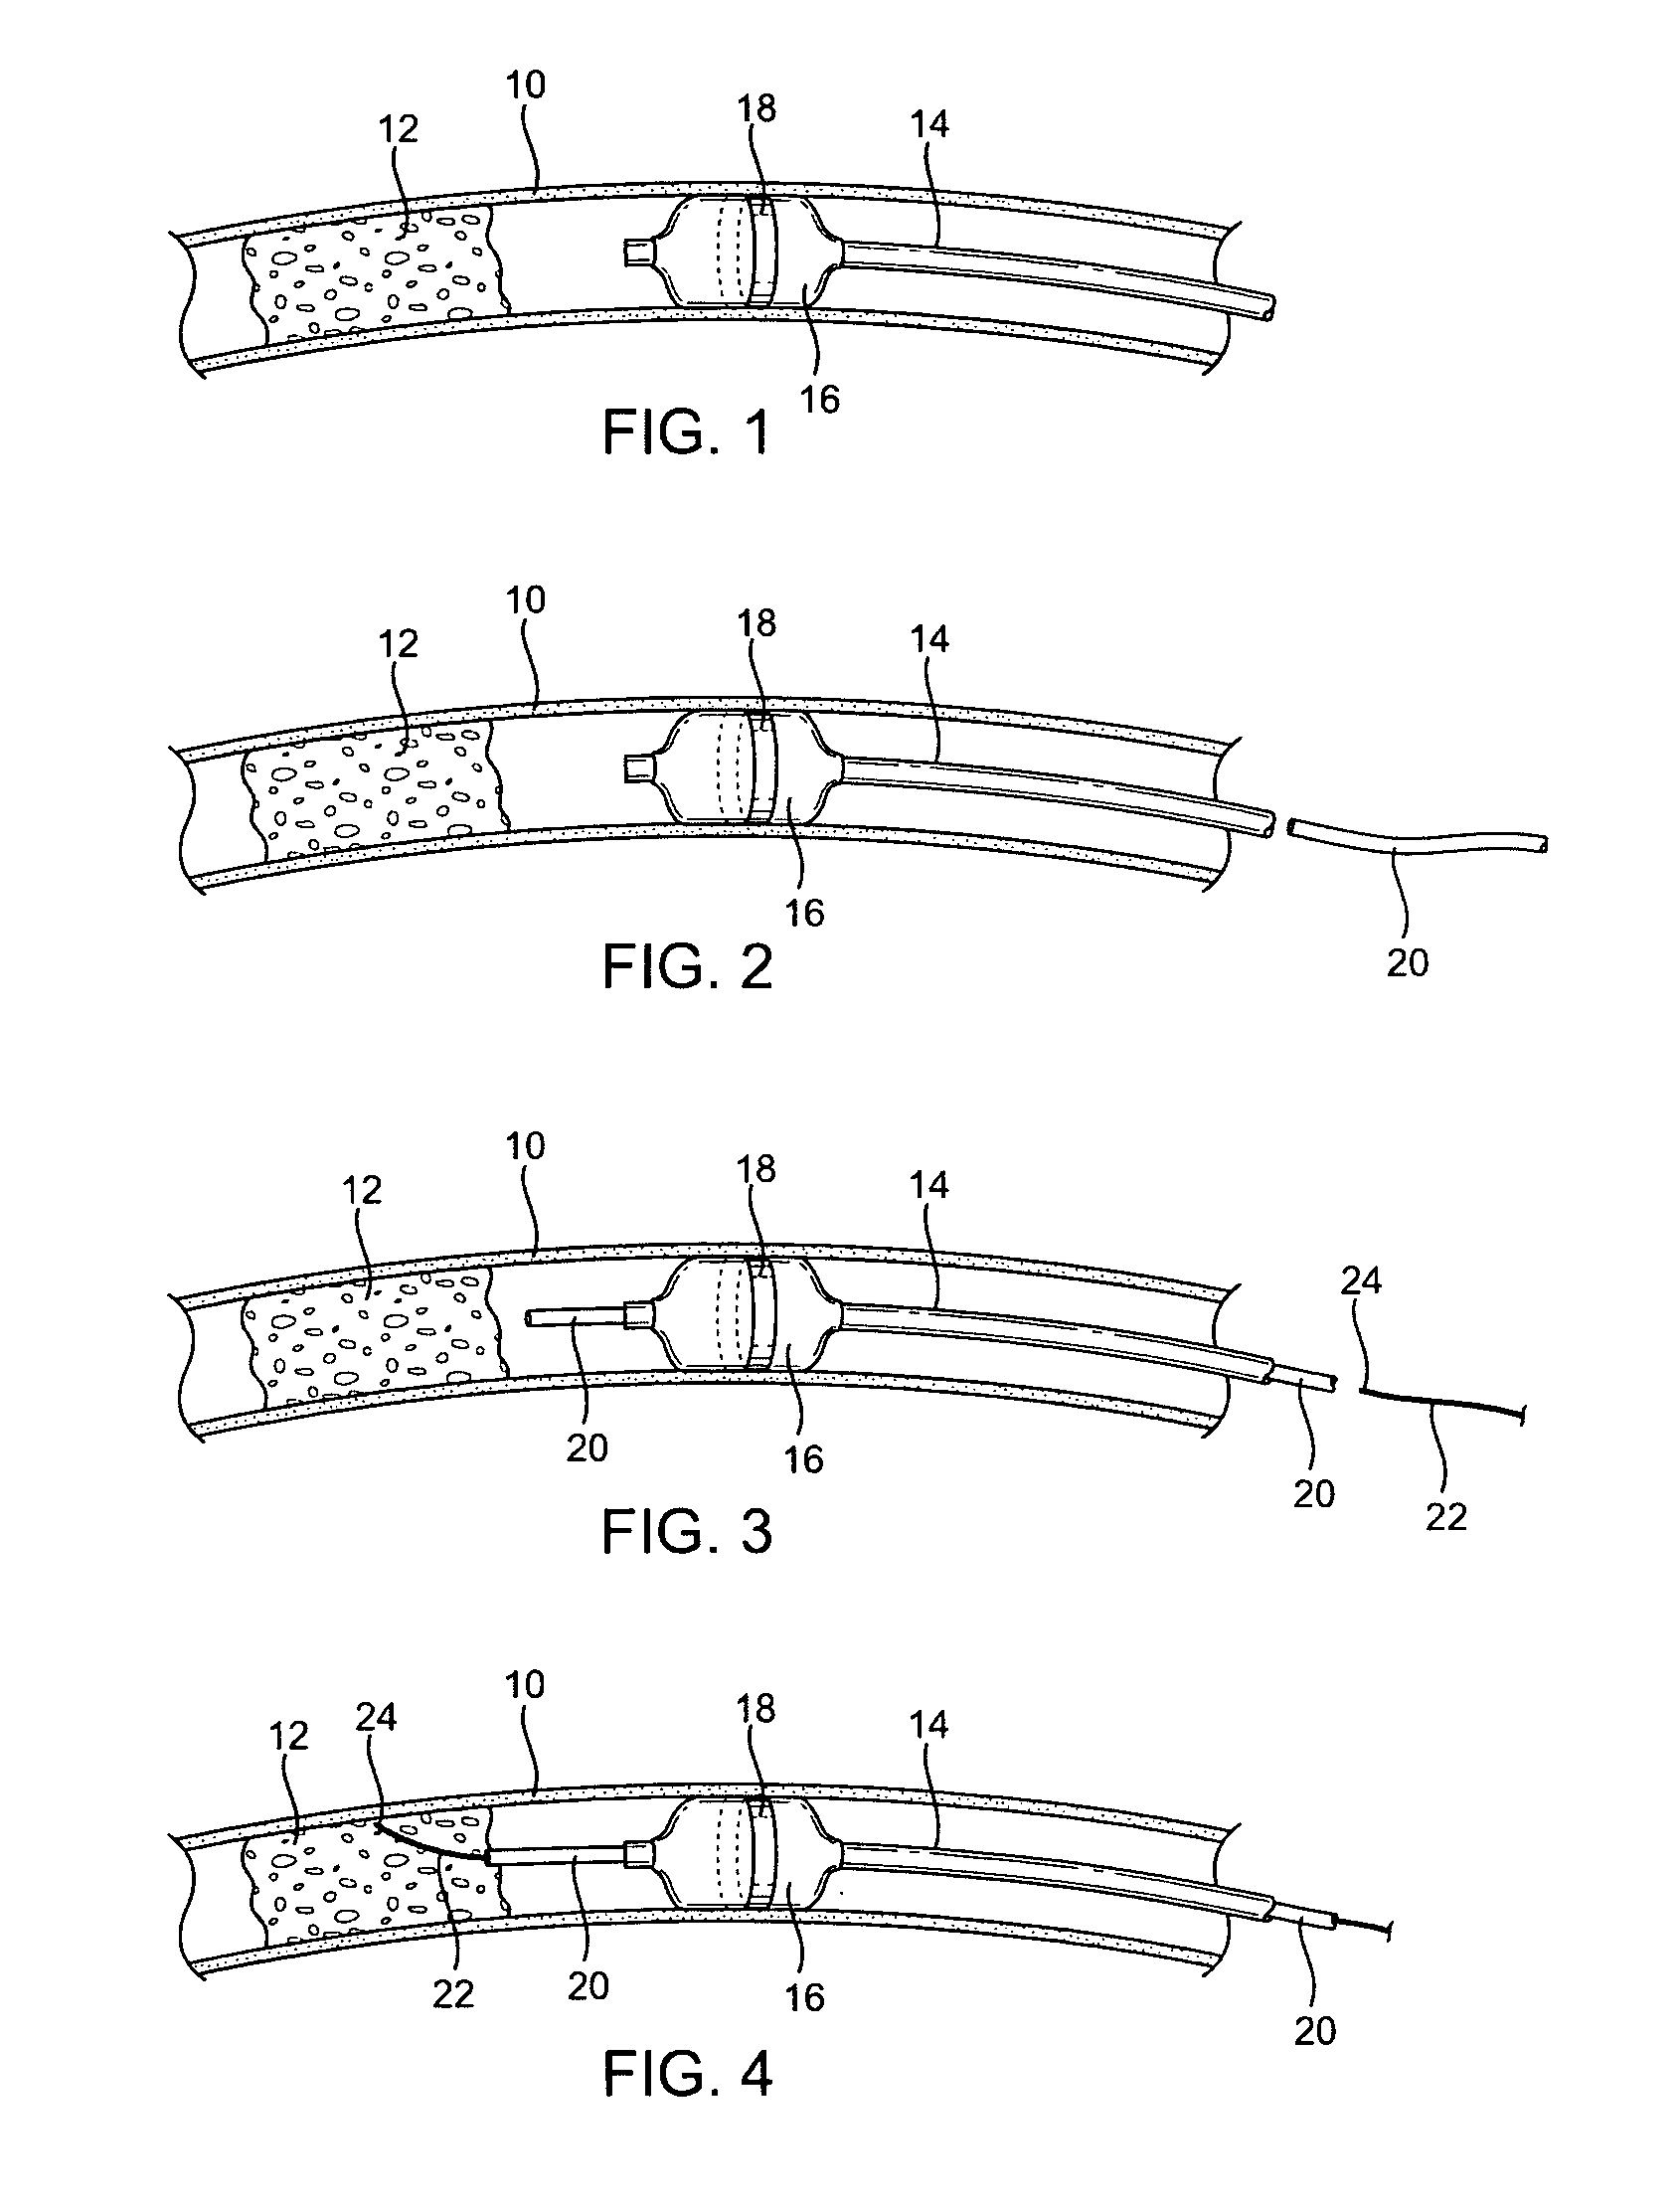 Intraluminal guidance system using bioelectric impedance